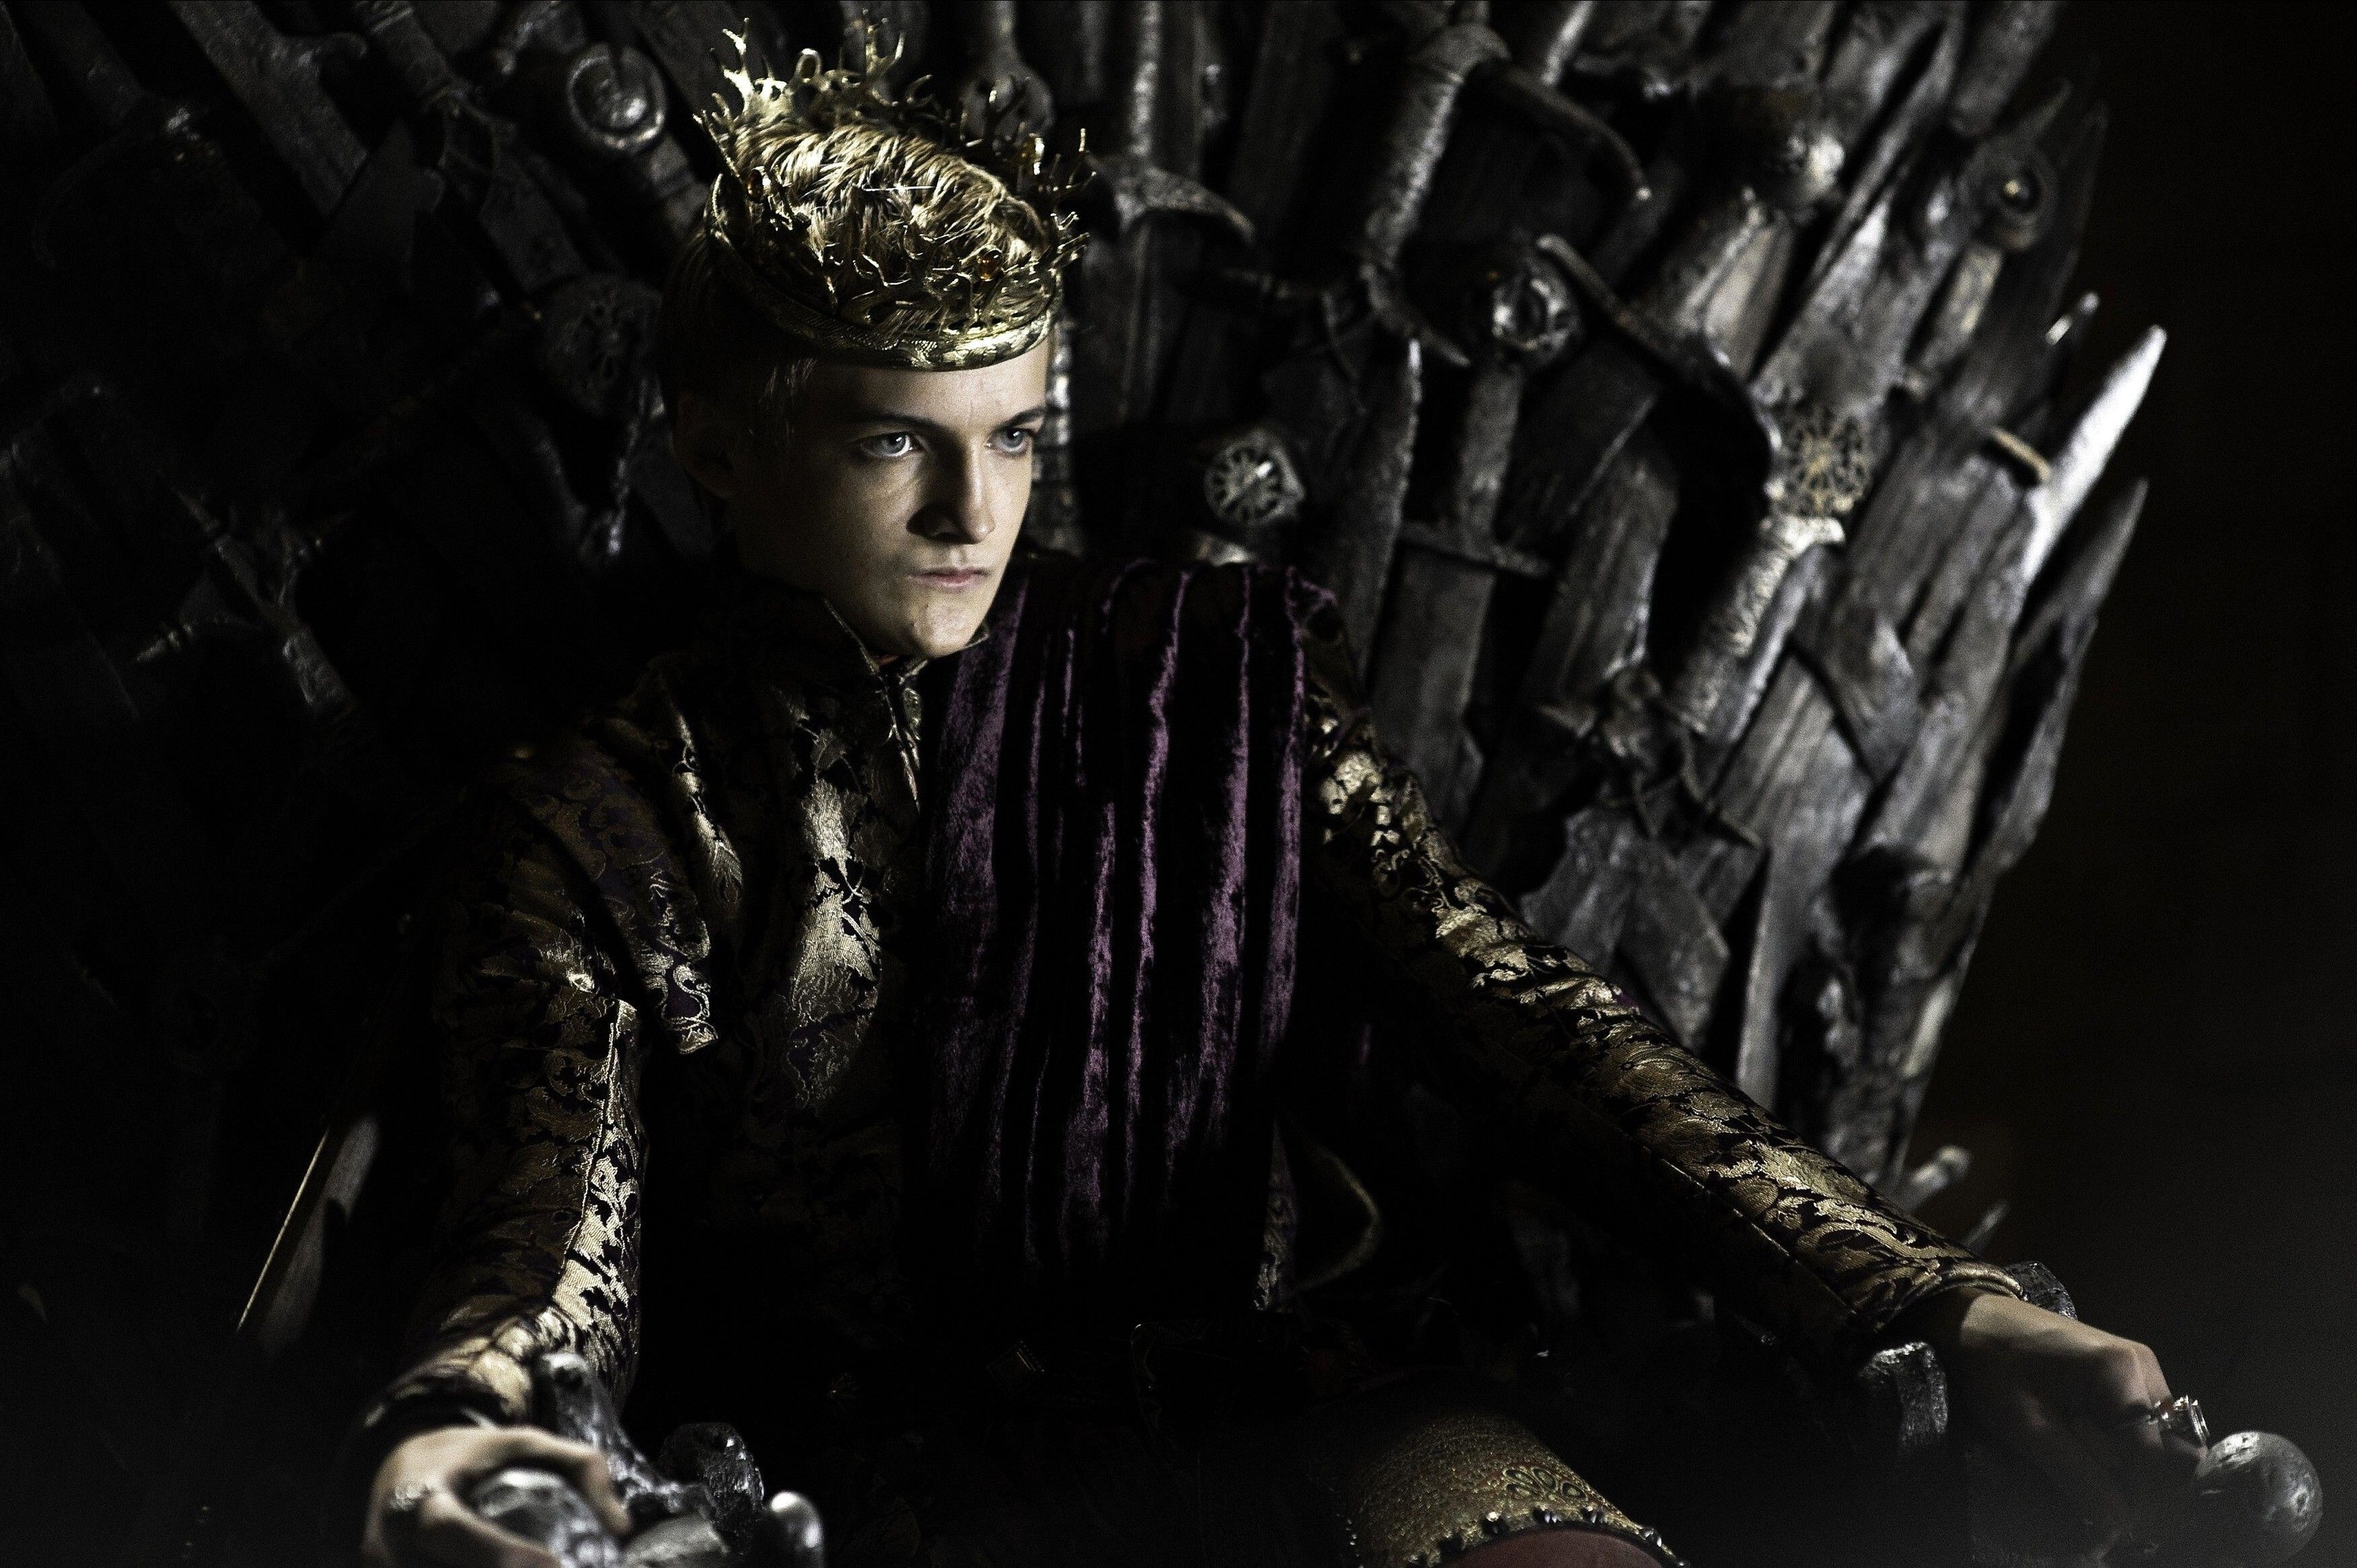 A petulant child king sits in anger on the Iron Throne